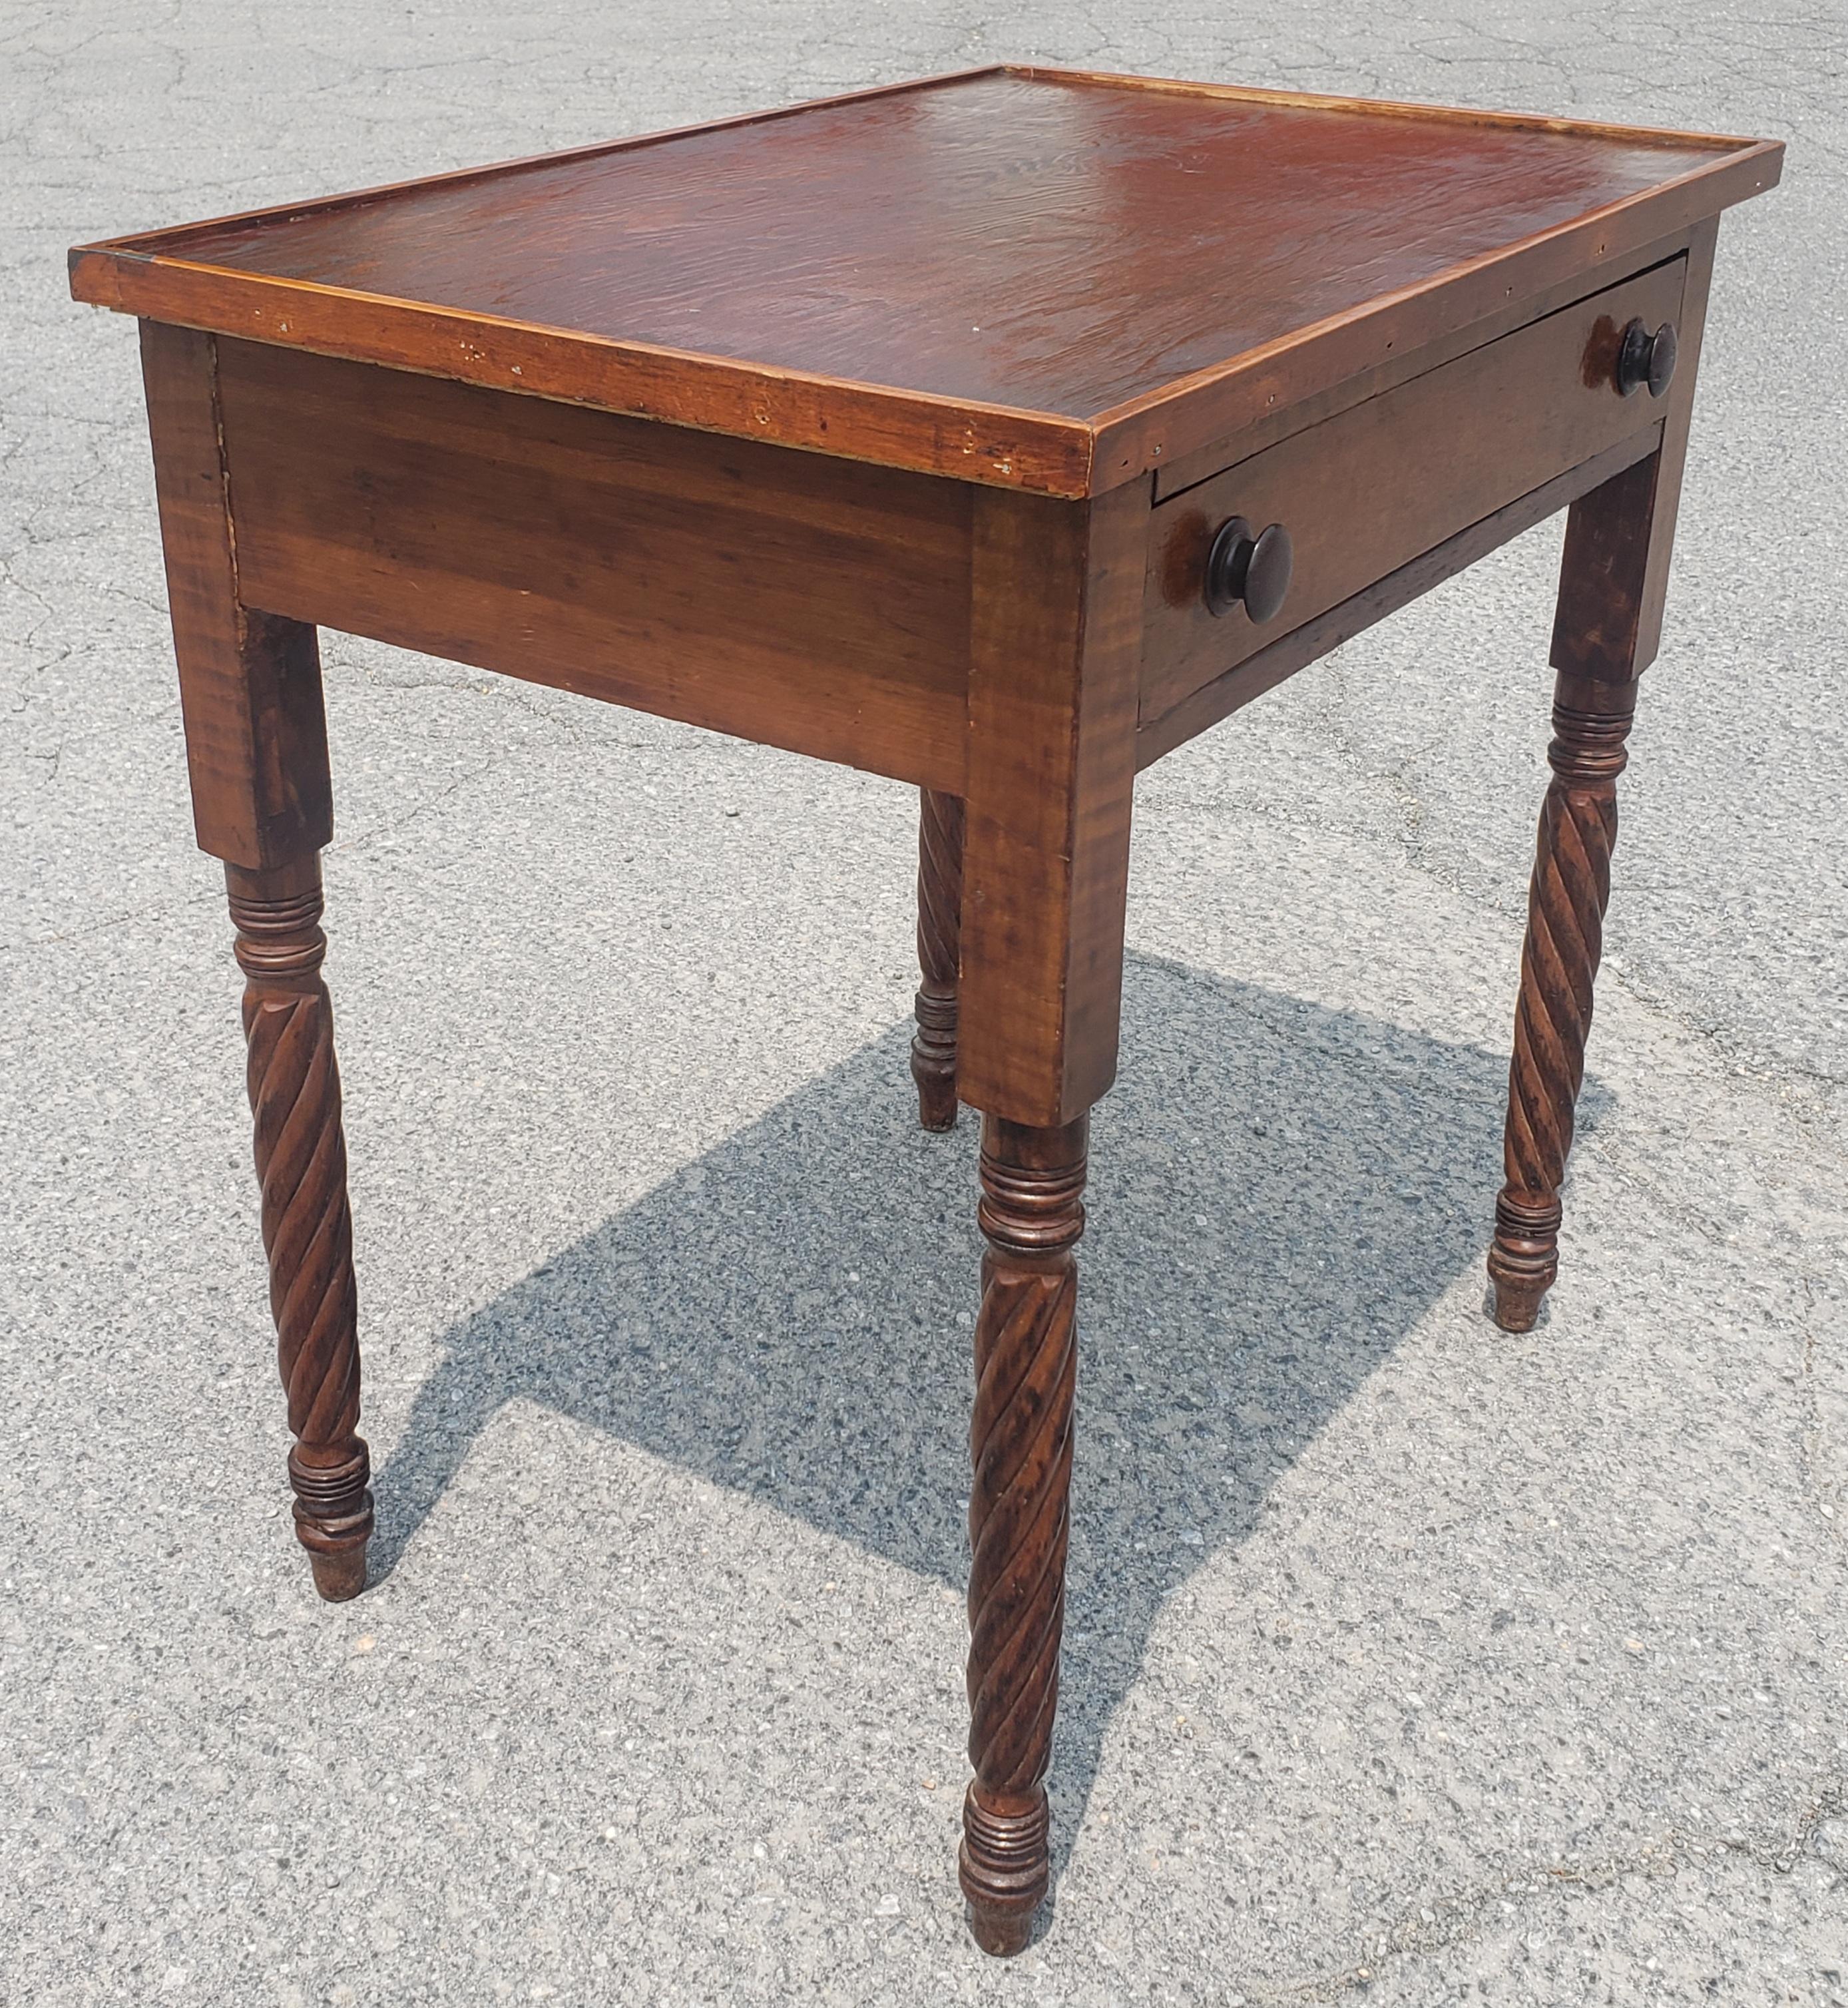 19th Century Early American Style Pine and Maple Spiral-Turned Leg Single Drawer Work Table For Sale